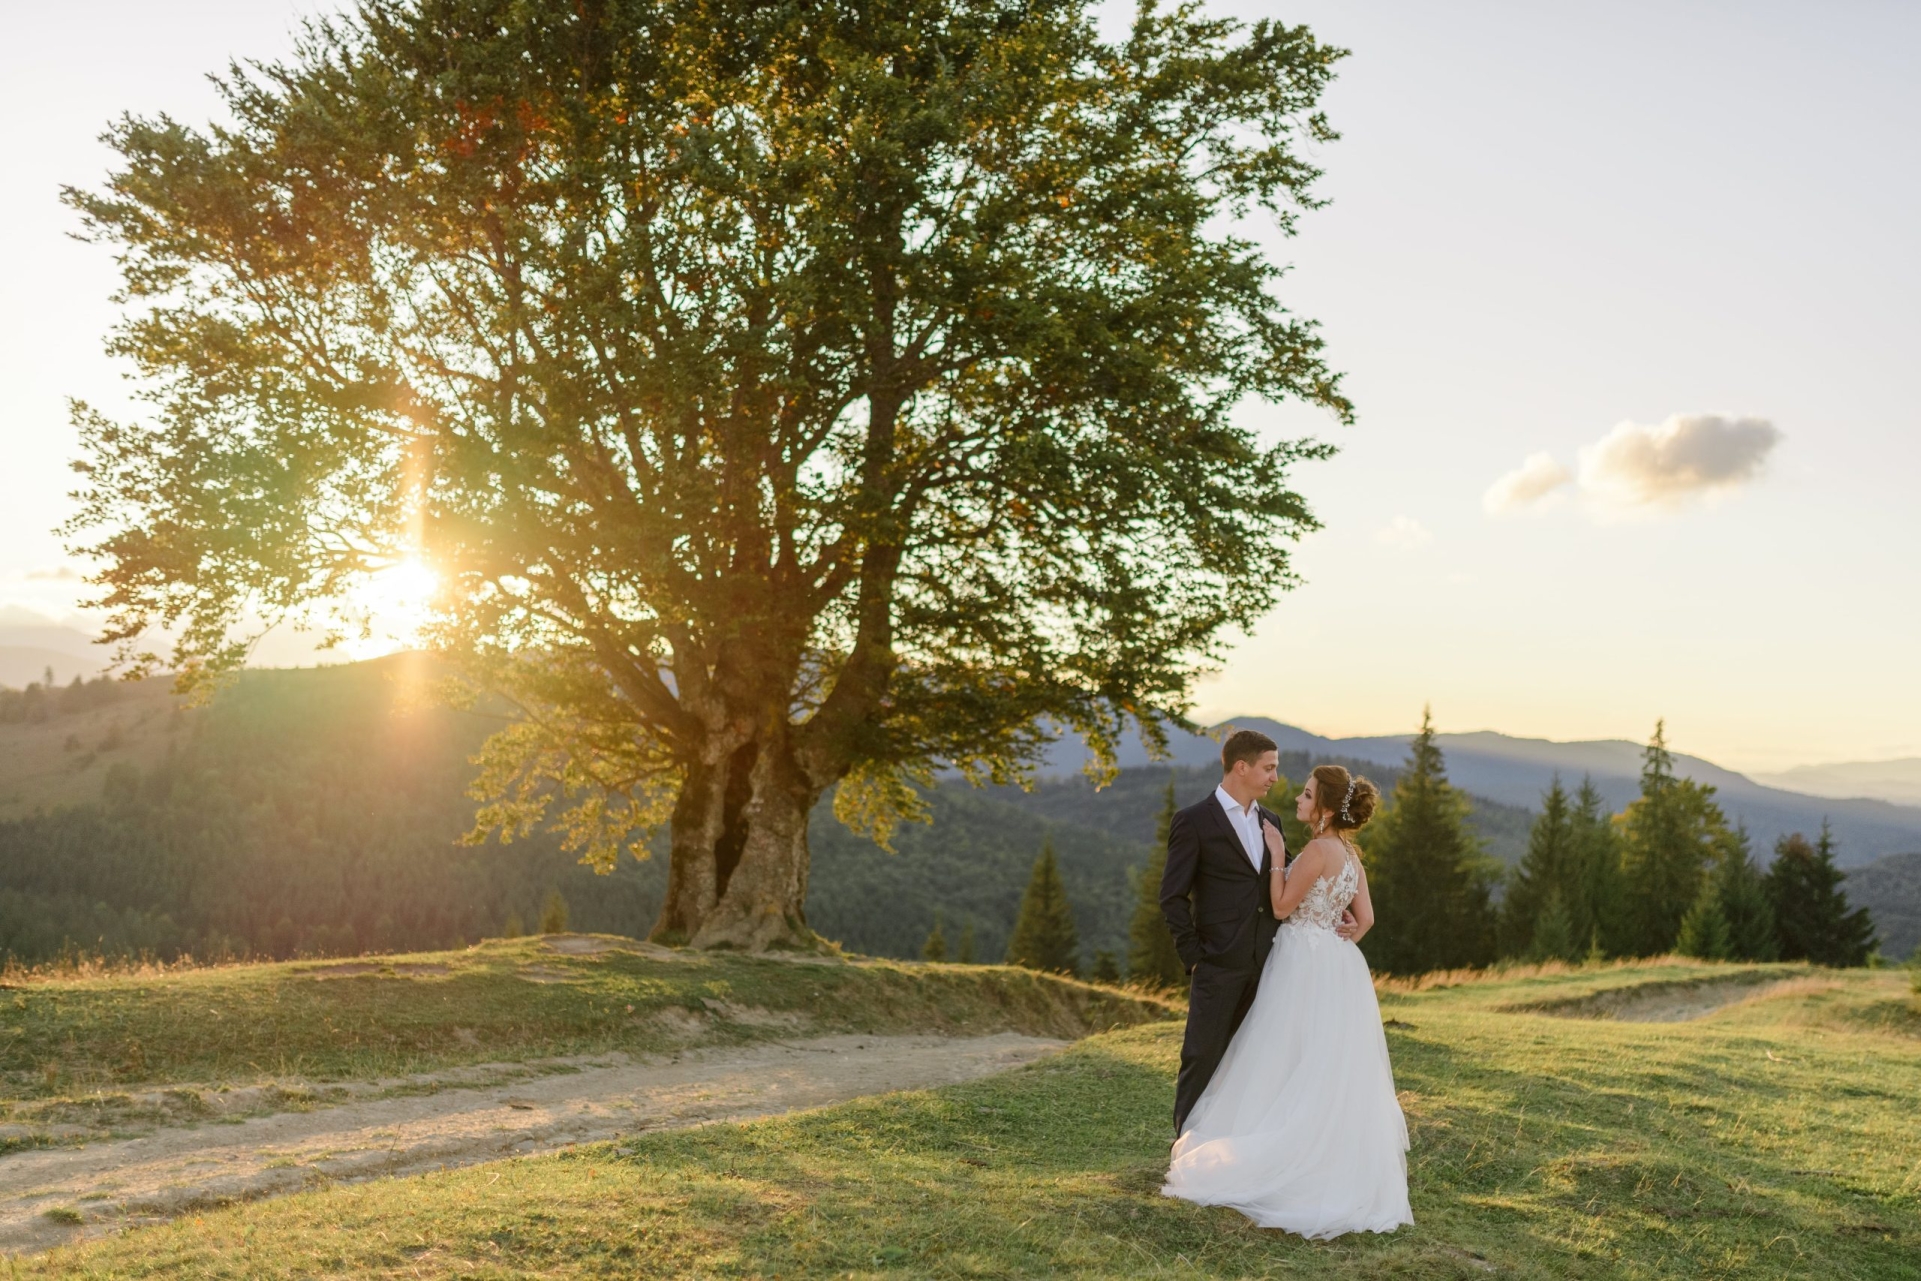 wedding photography in the mountains 2021 09 01 15 26 17 utc min scaled